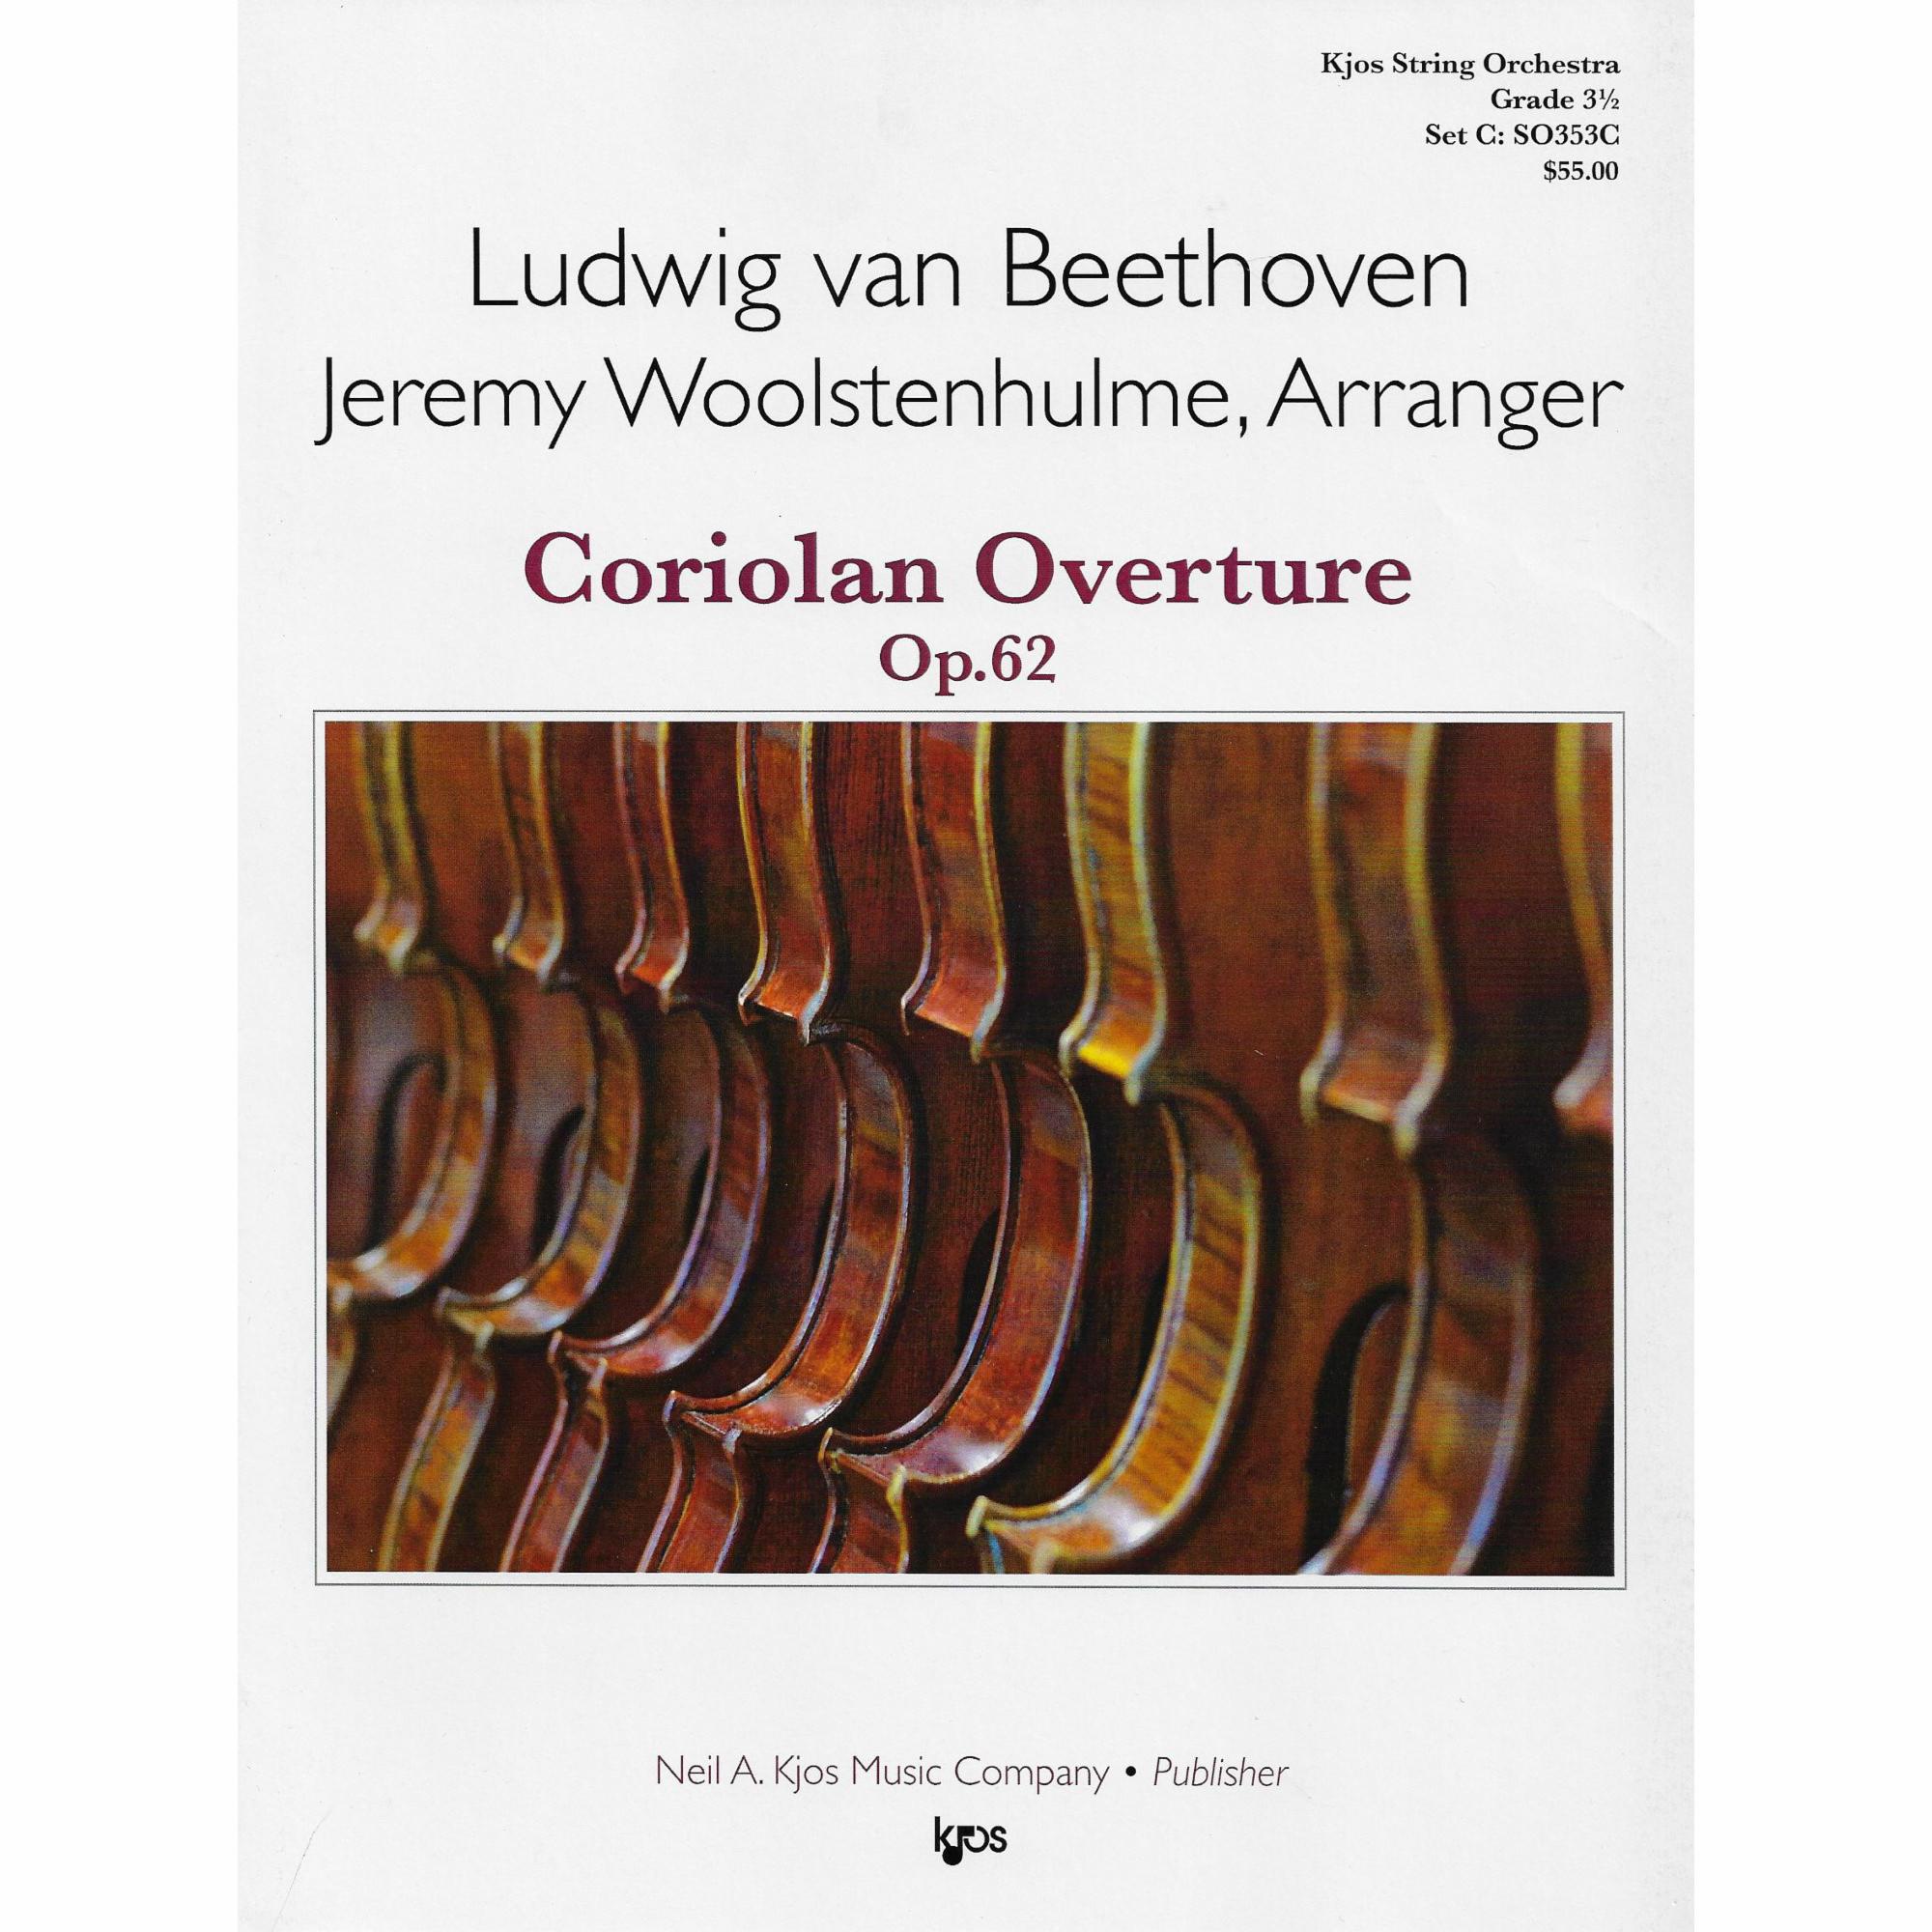 Coriolan Overture, Op. 62 for String Orchestra